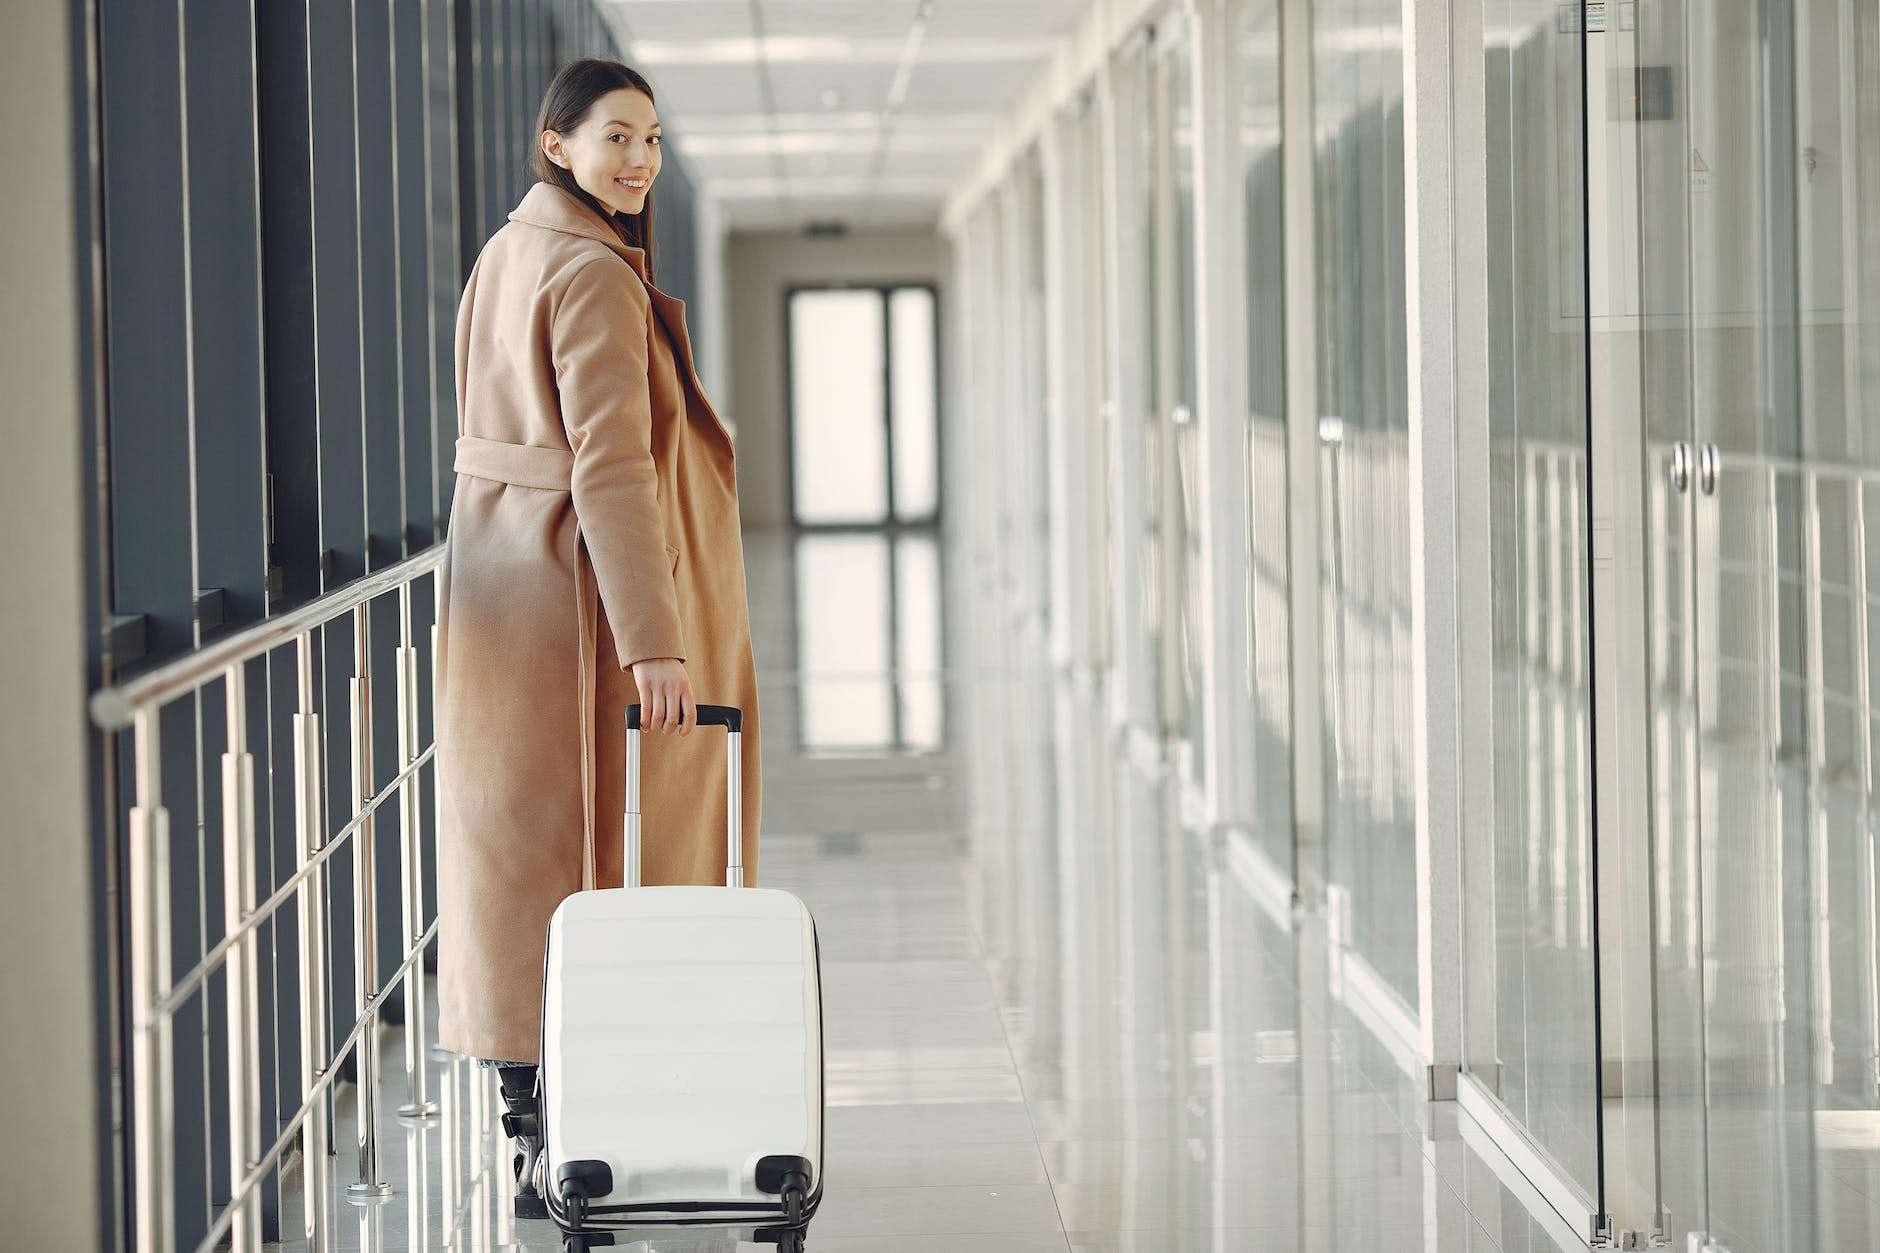 stylish happy traveler with suitcase in airport hallway